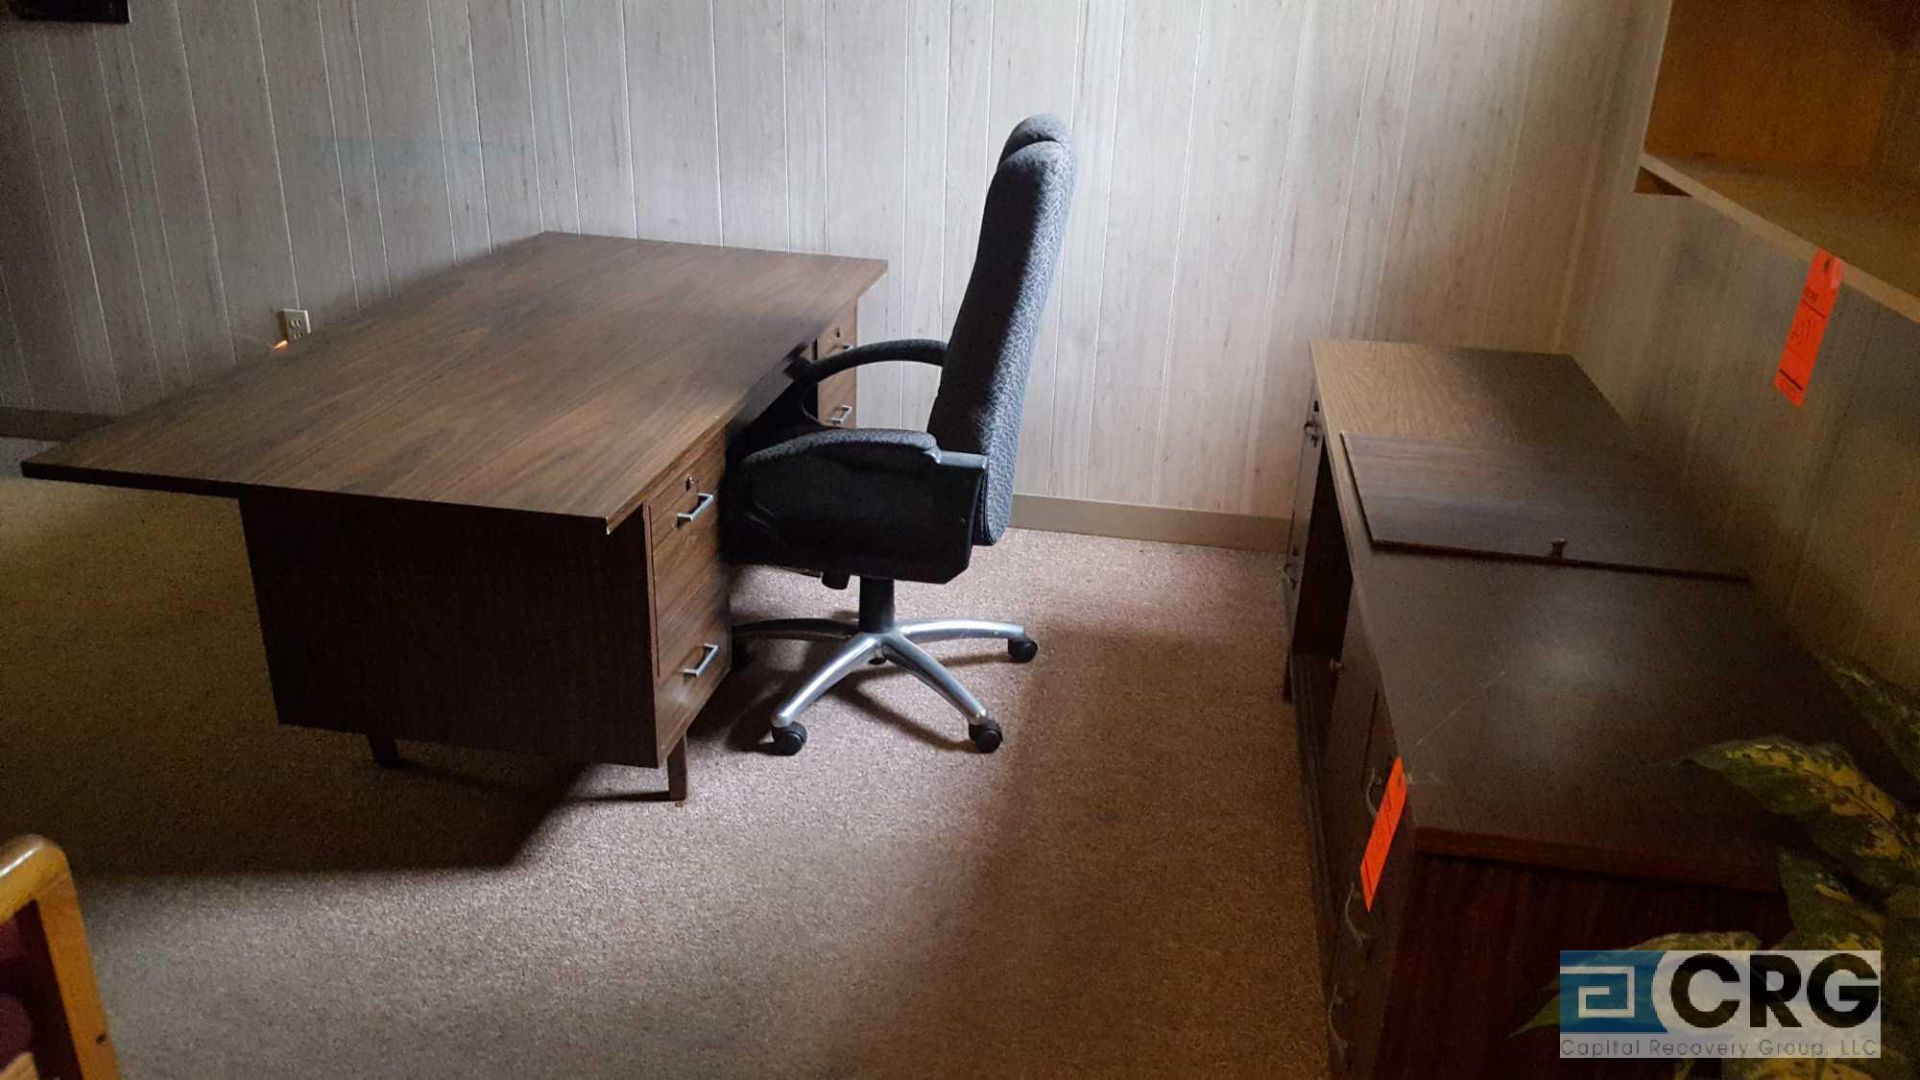 Lot of assorted office furnishings etc, including desks, chairs, file cabinets, bookcases etc, - Image 9 of 15